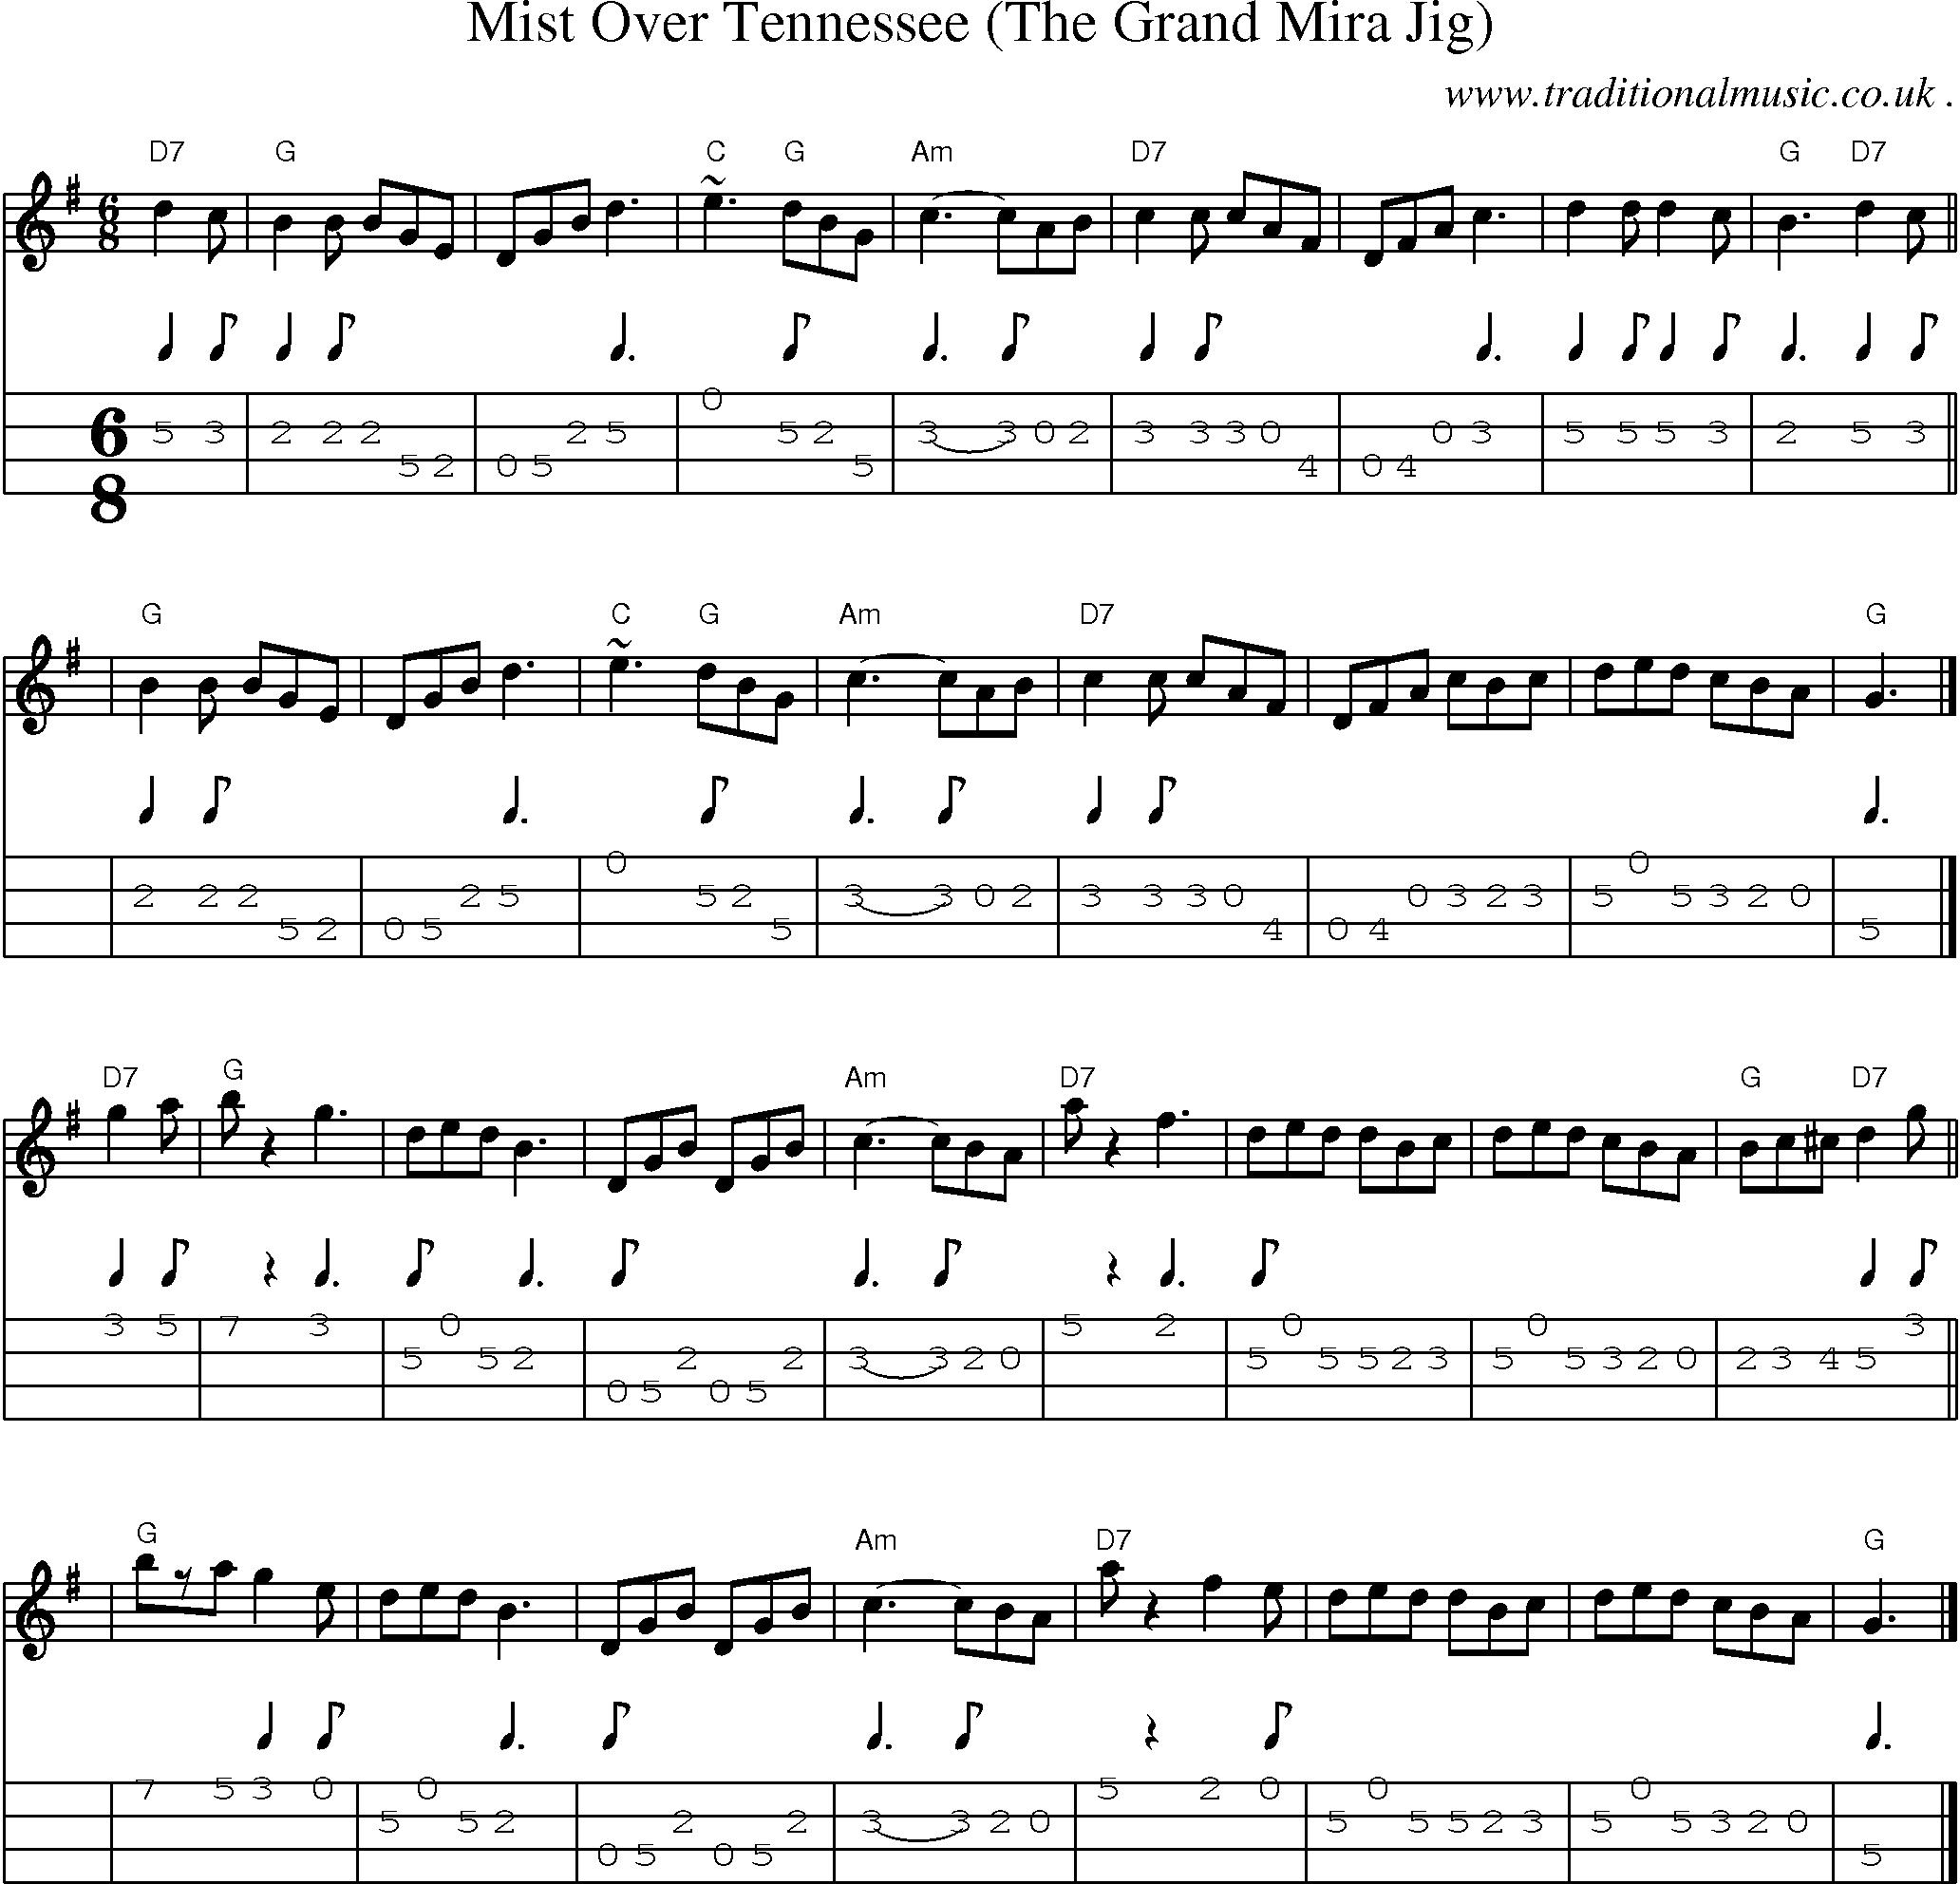 Sheet-music  score, Chords and Mandolin Tabs for Mist Over Tennessee The Grand Mira Jig